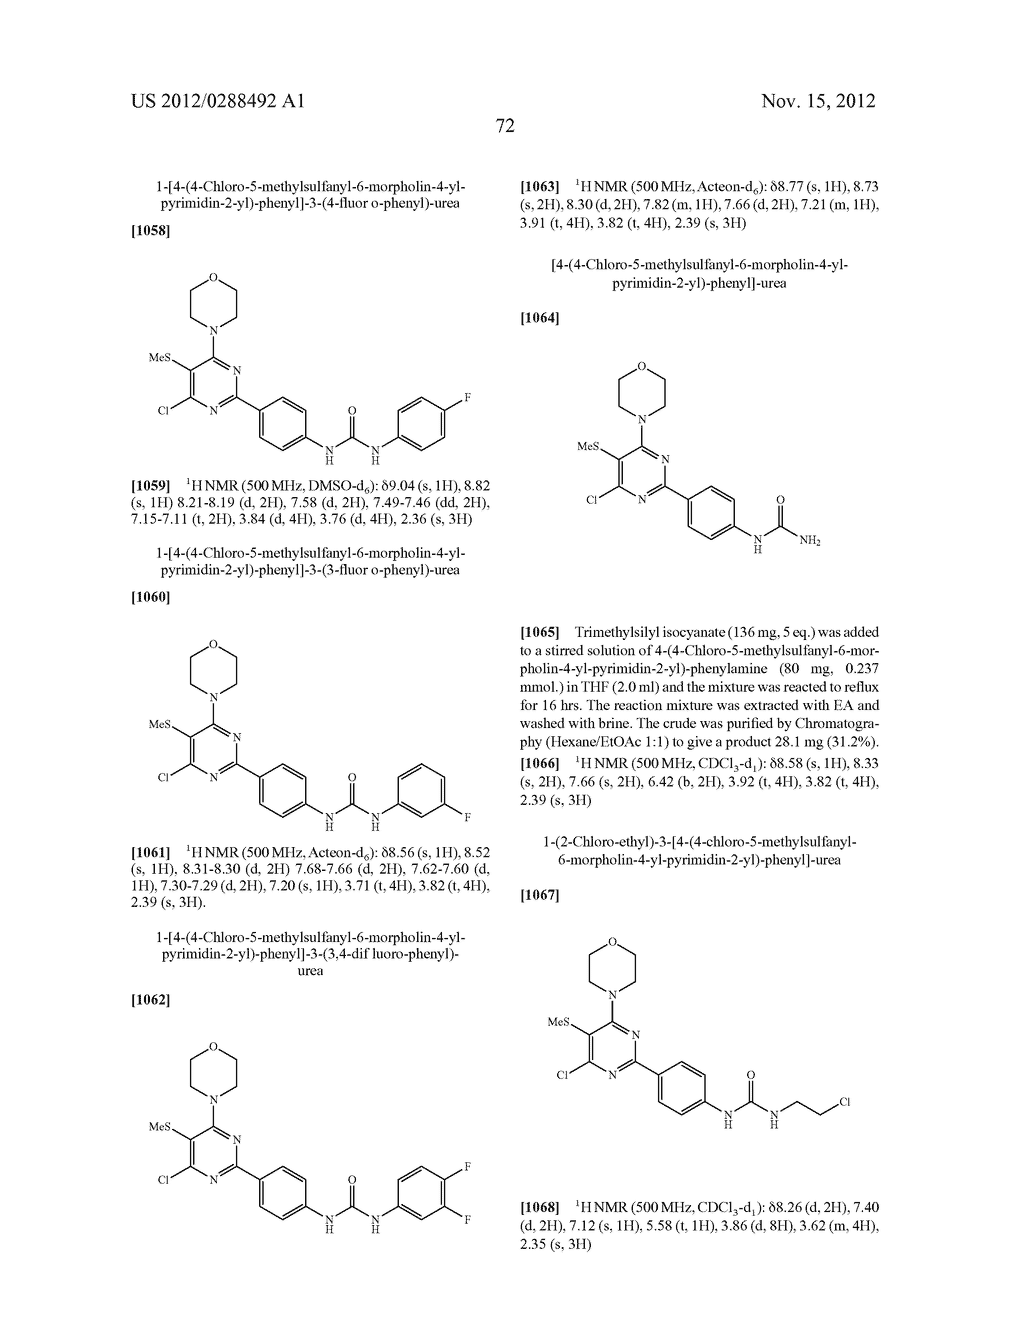 NOVEL PYRIMIDINE COMPOUNDS AS mTOR AND PI3K INHIBITORS - diagram, schematic, and image 73